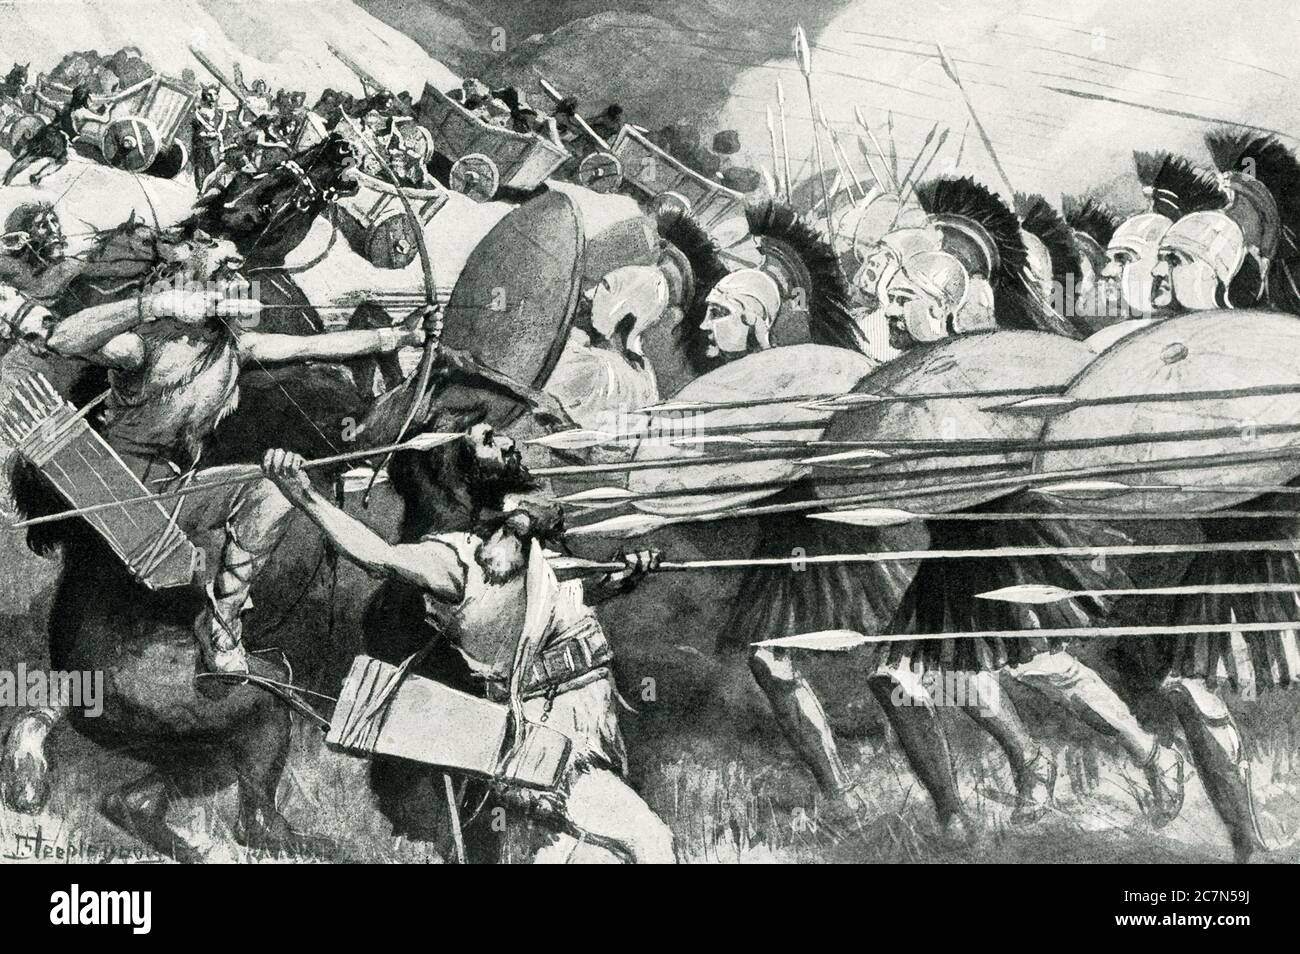 The Macedonian Phalanx - Battle of the Carts (335 B.C.). The first of the young Alexander’s famous victories was against the wild mountain tribes of Thrace. From the summits of their rocky passes they rolled down carts full of heavy stones, hoping to crush the climbing Macedonians and break the ranks of the dreaded phalanx. Alexander met the novel attack by bidding his soldiers crouch in a compact mass beneath their shields, so that the plunging carts leaped fairly over them without injury. Then the unbroken phalanx met and defeated the lighter armed barbarians. Stock Photo